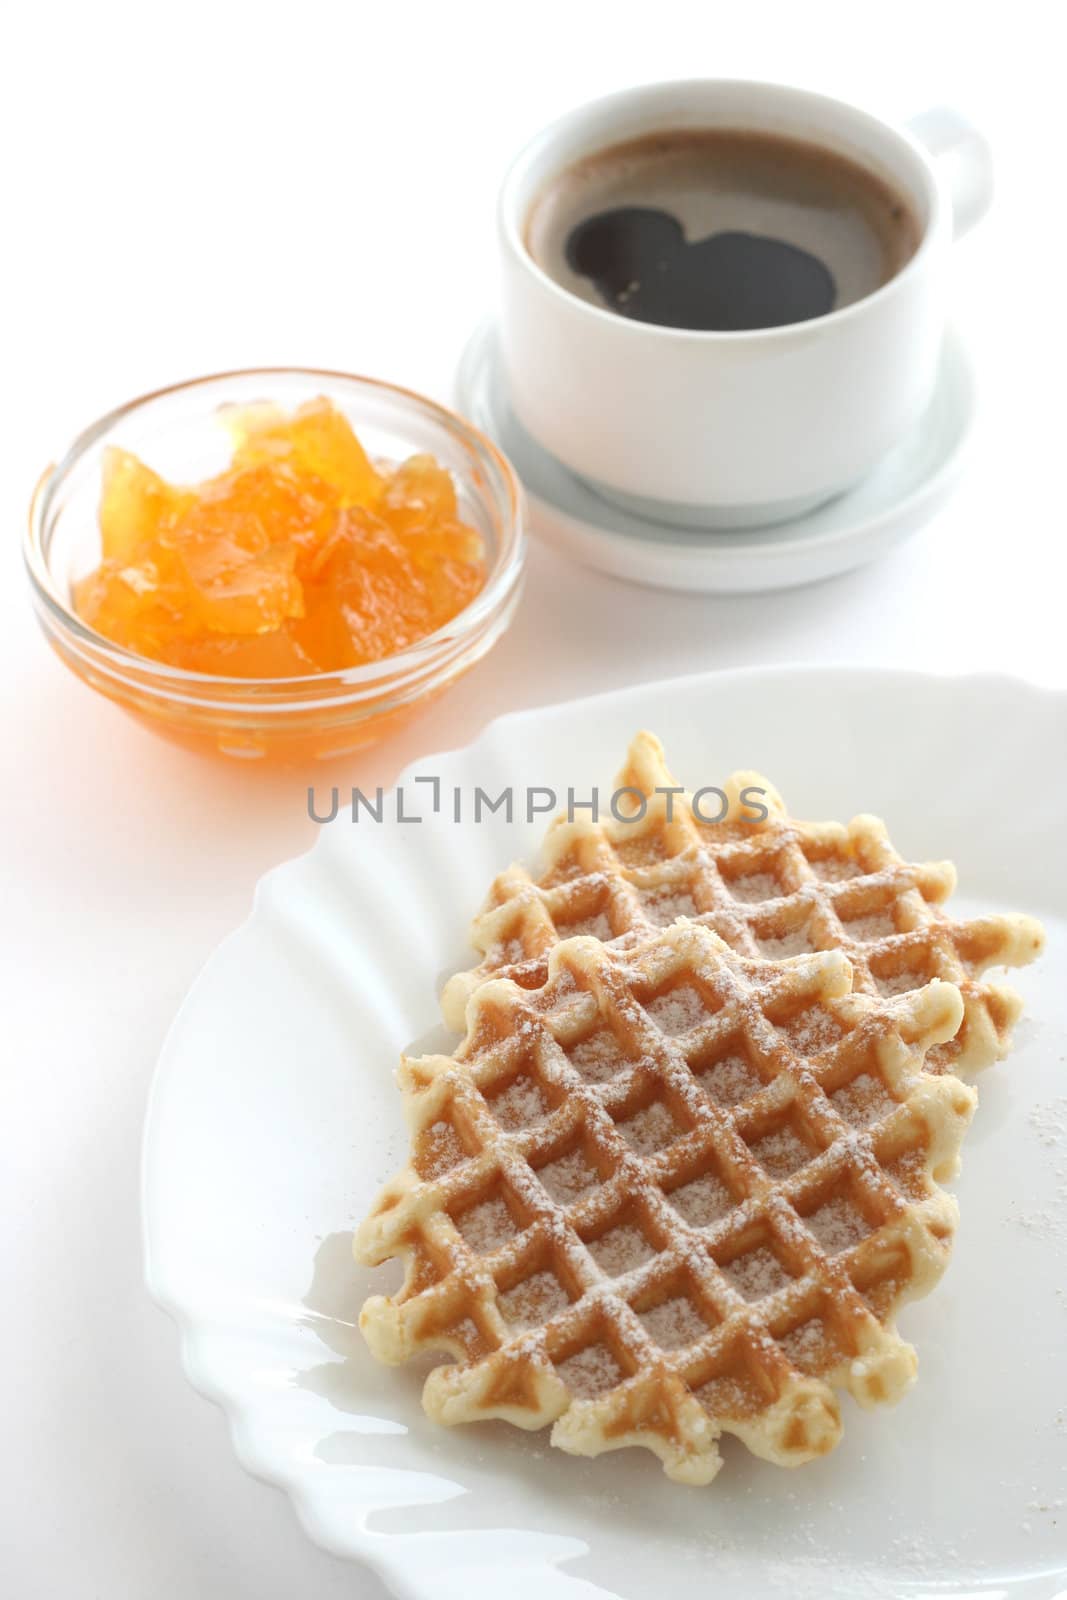 waffles with jam and a cup of coffe by nataliamylova